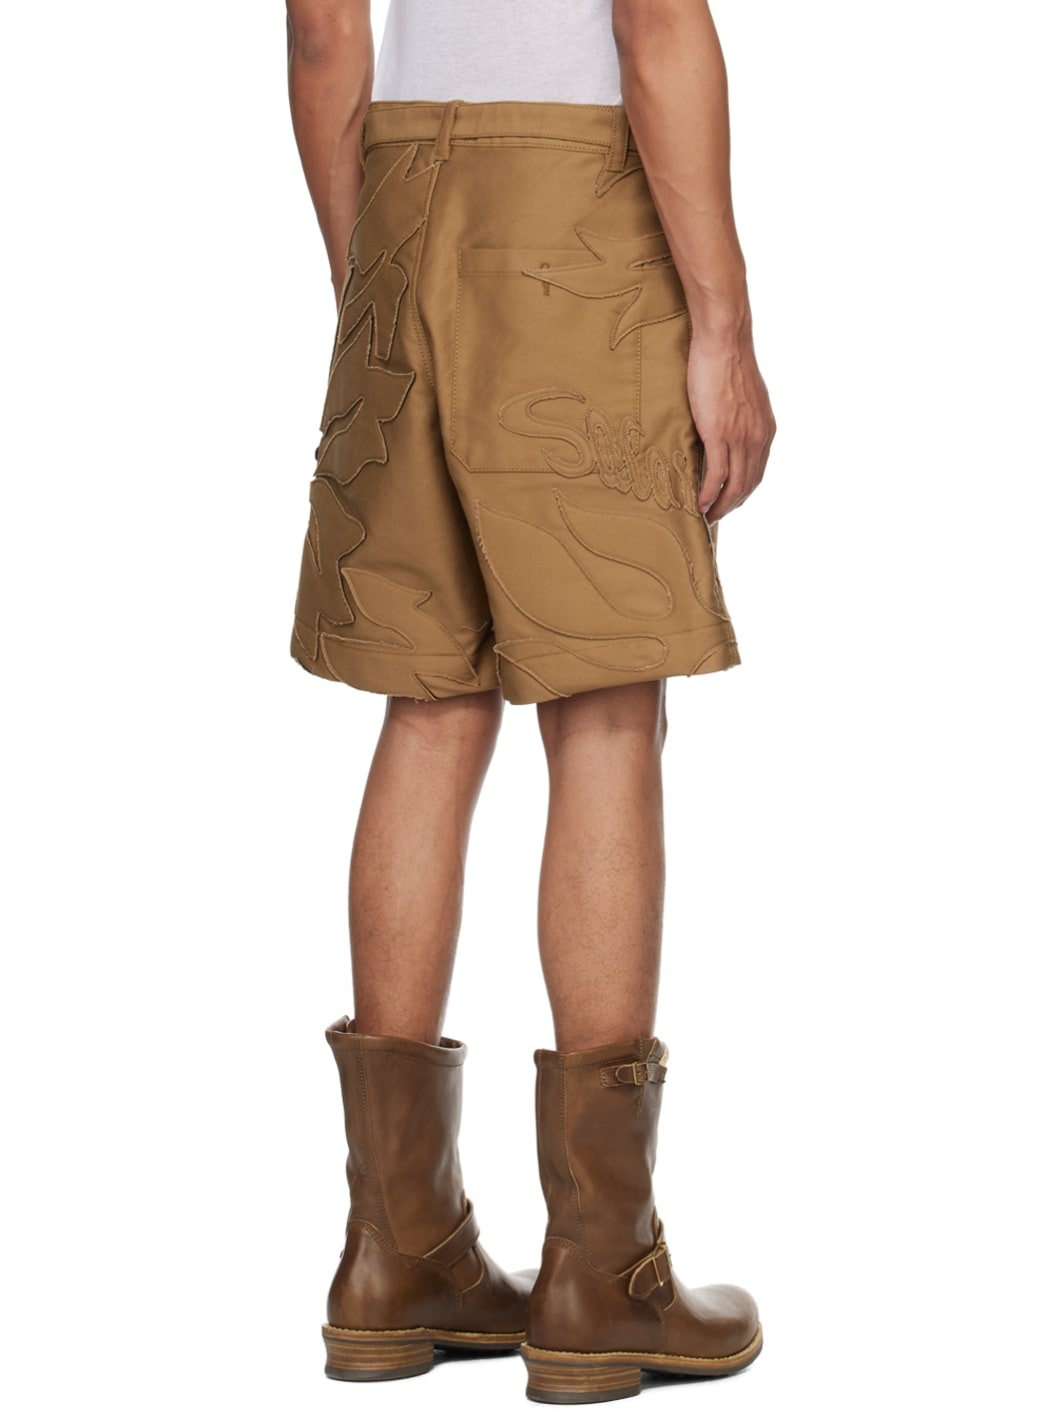 Tan Embroidered Shorts - 3